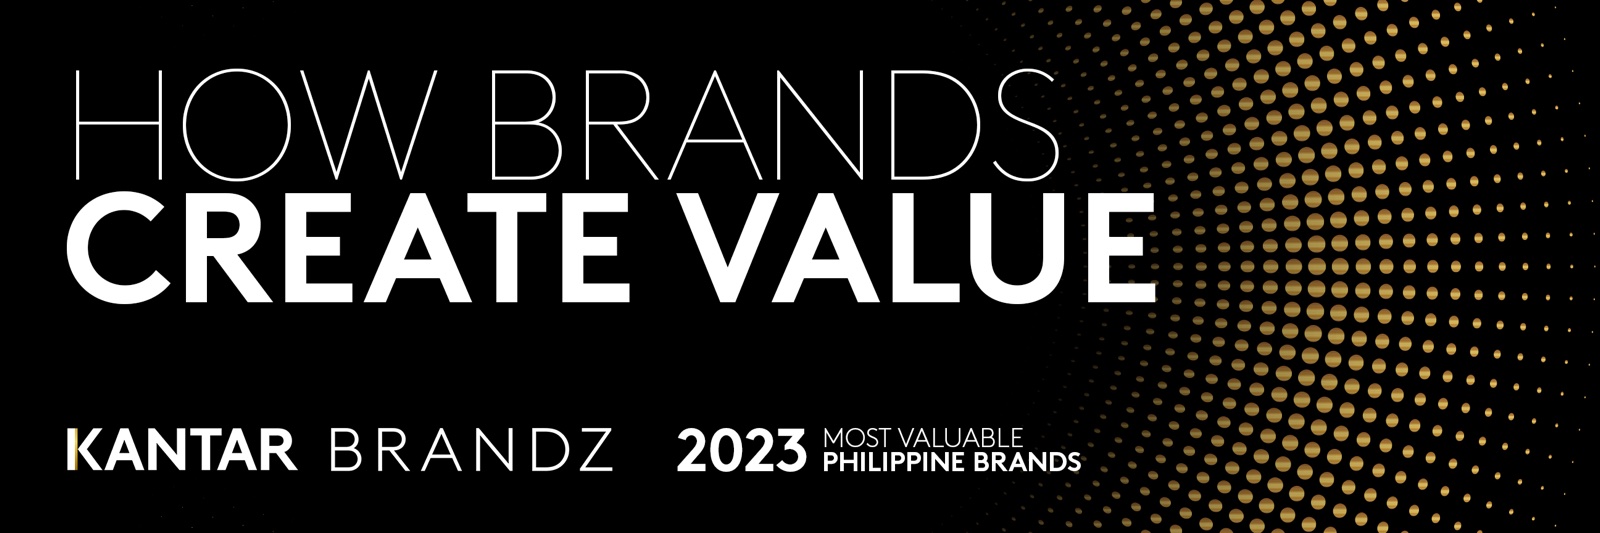 Red Horse Among the Top 30 Most Powerful Southeast Asian Brands, According to New Kantar BrandZ Ranking